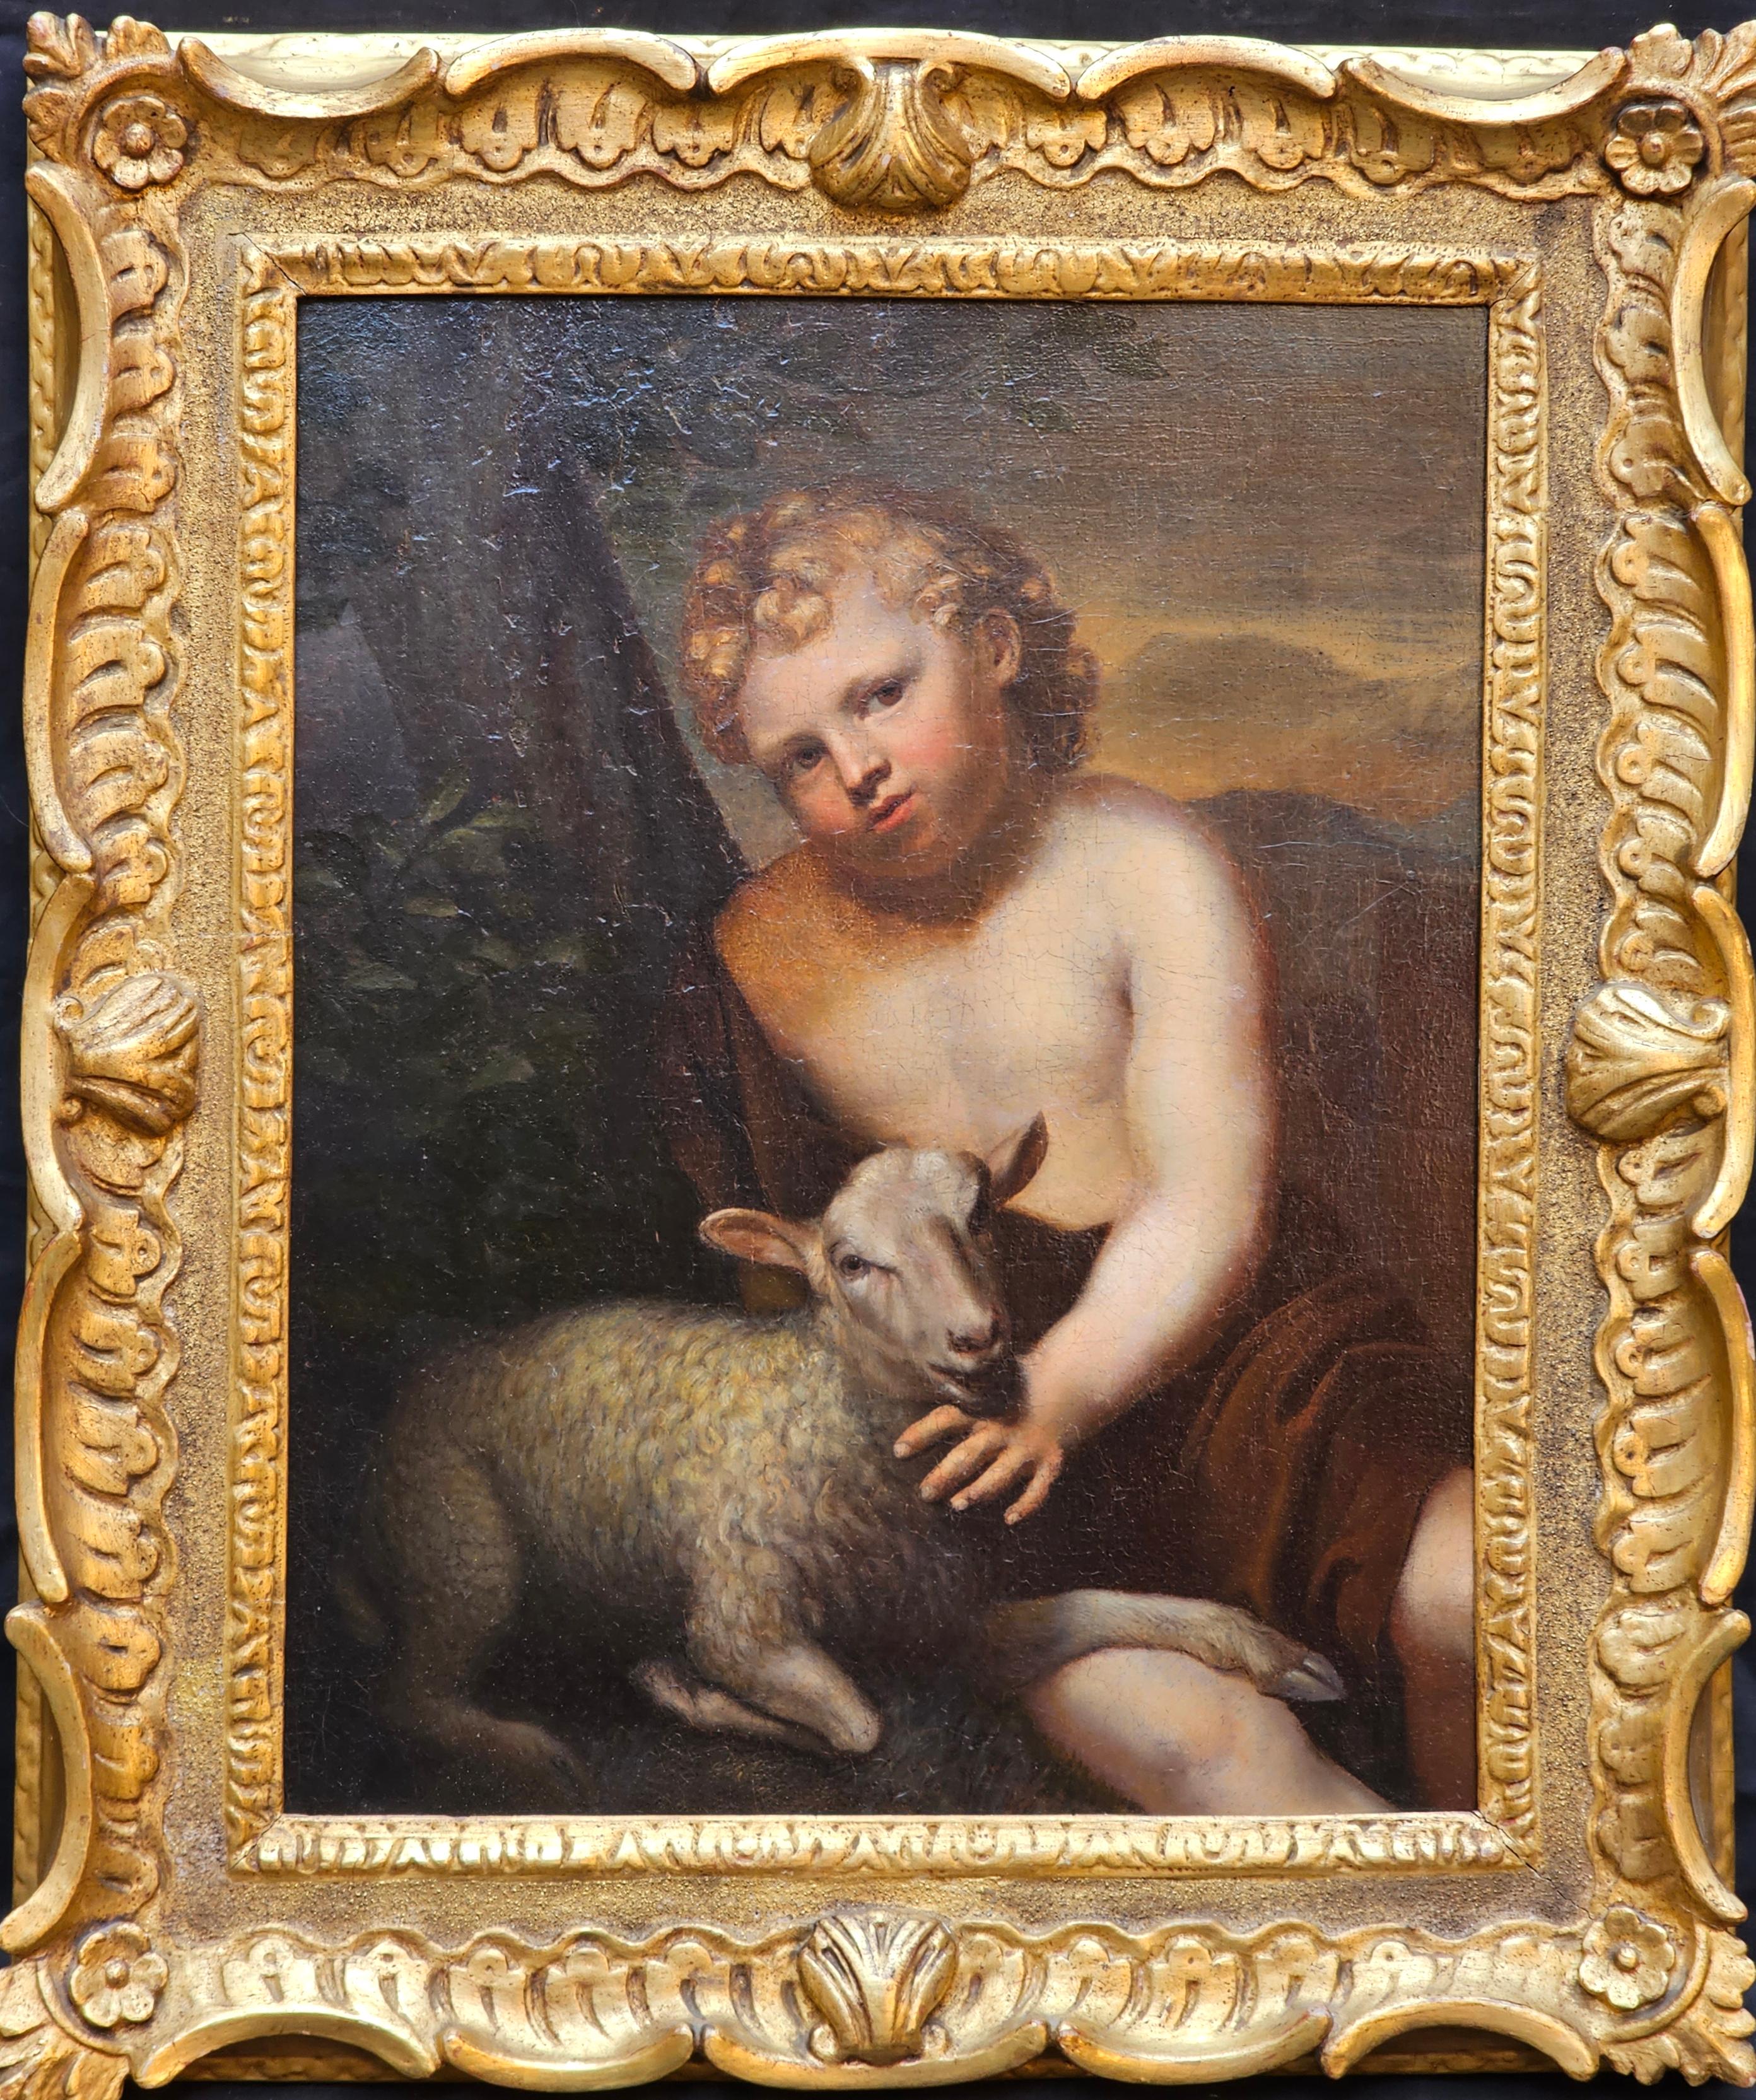 Unknown Portrait Painting - The Infant St John the Baptist with Lamb - Italian Old Master art oil painting 